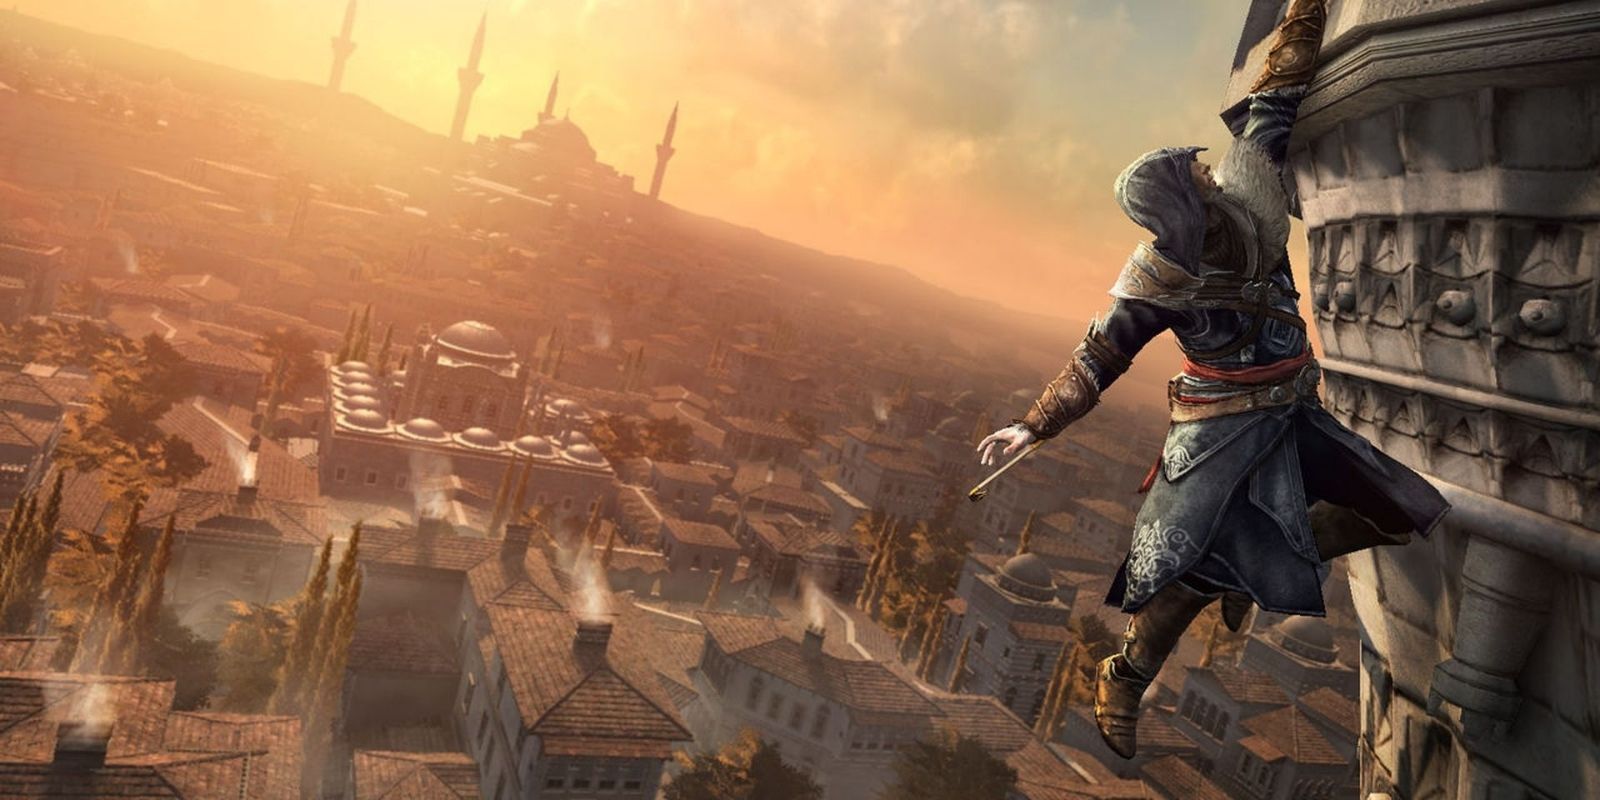 Assassin's Creed character scaling a building